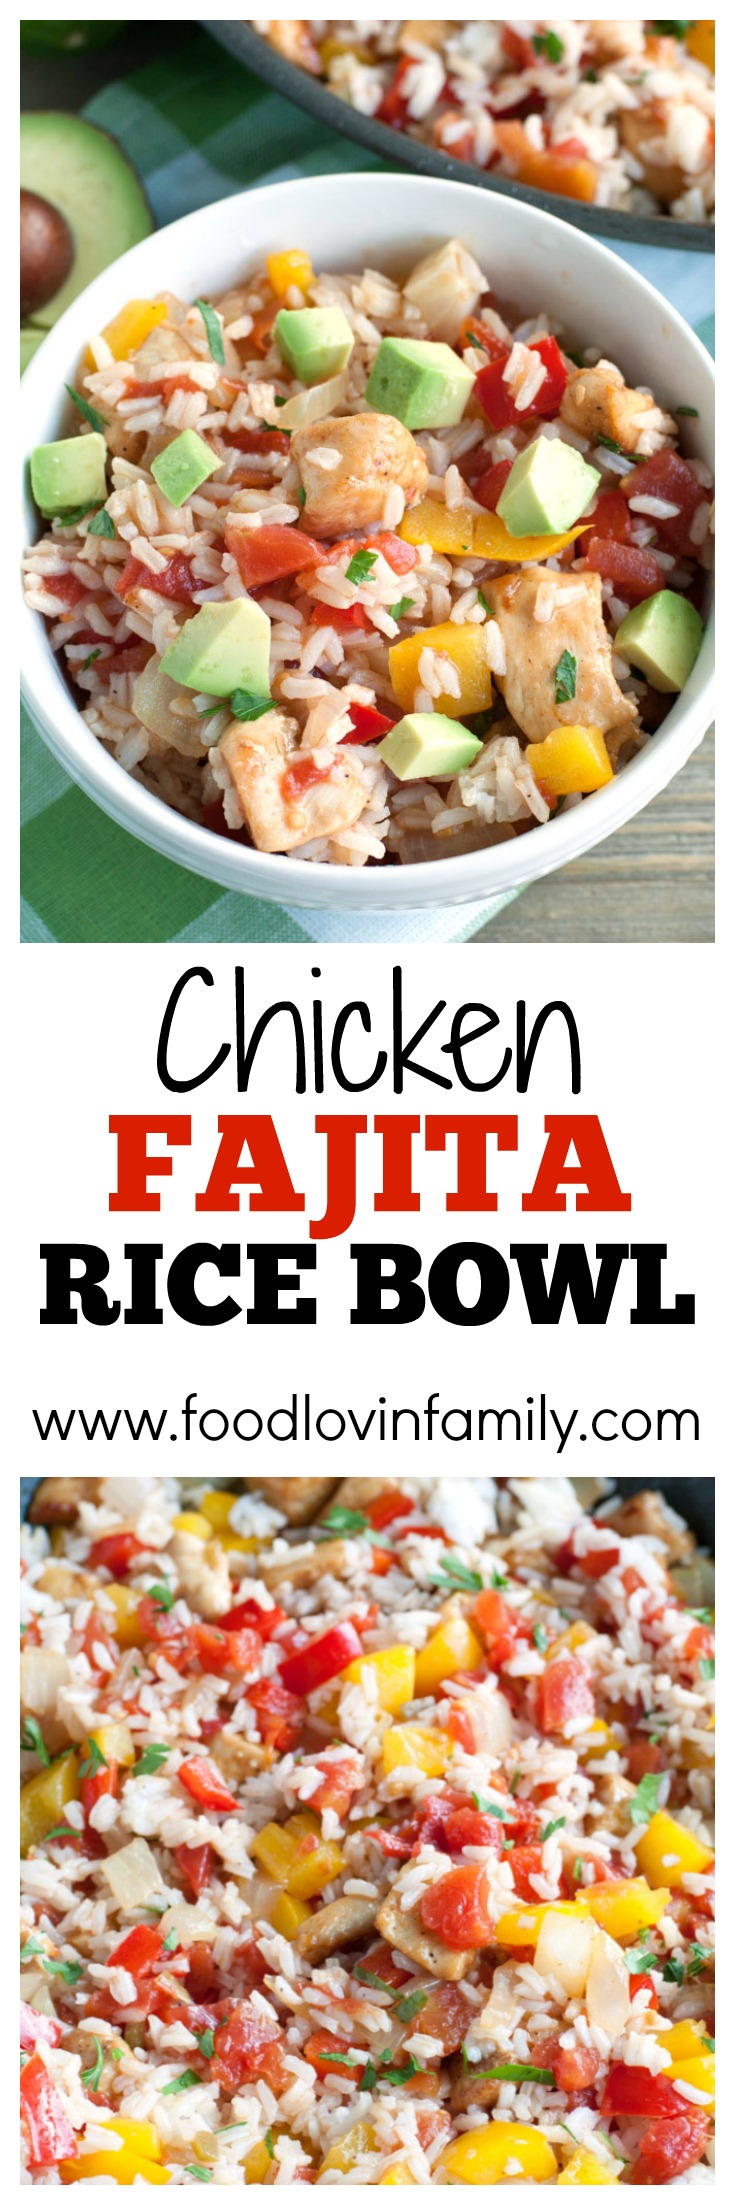 Chicken Fajita Rice Bowl - fajita seasoned chicken mixed with peppers, onions, RO*TEL and cilantro lime rice. A bold and flavorful meal the family will love. PIN